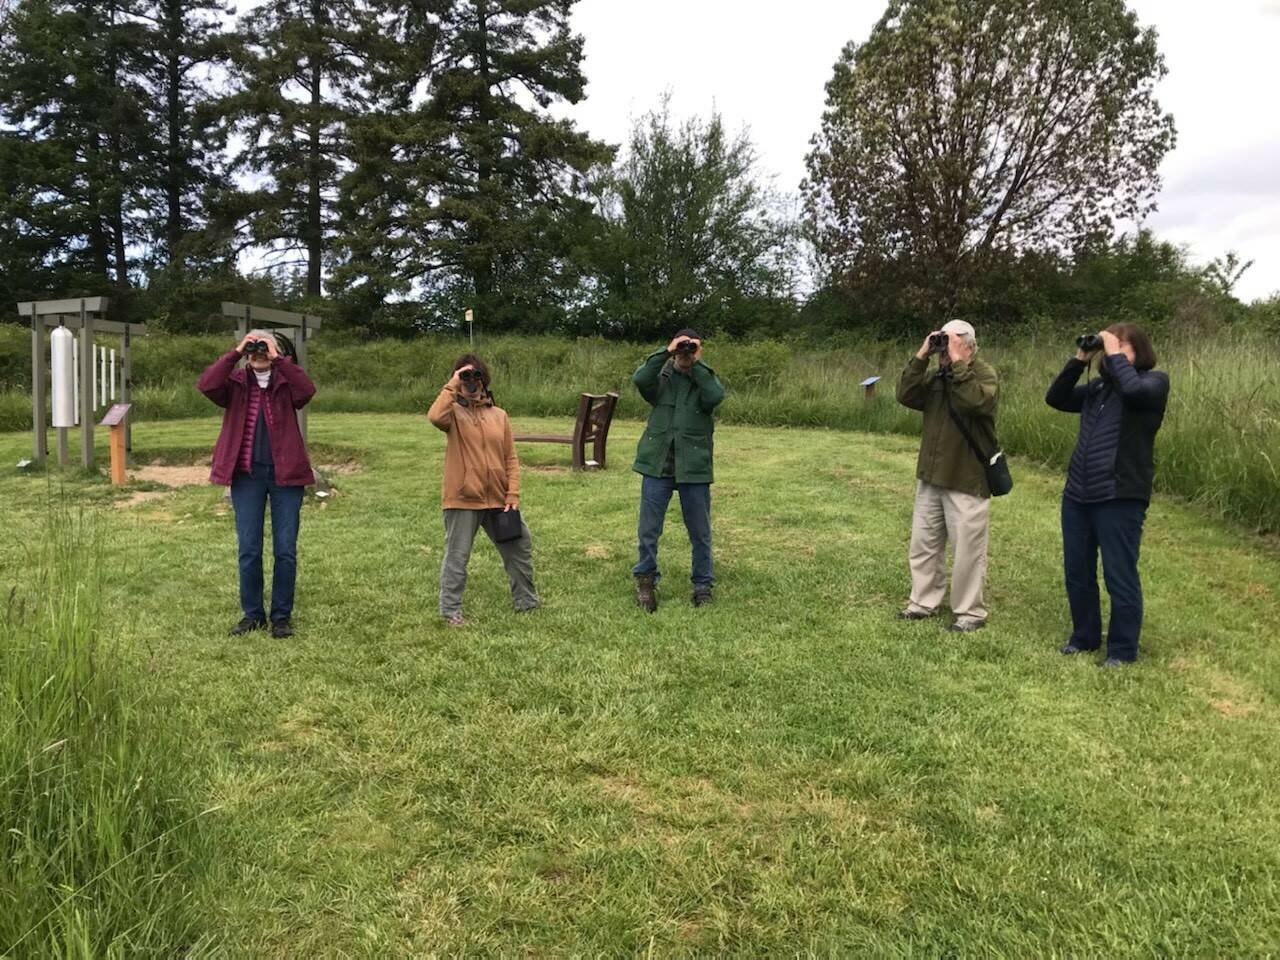 Contributed photo
Birdwatchers at the park.